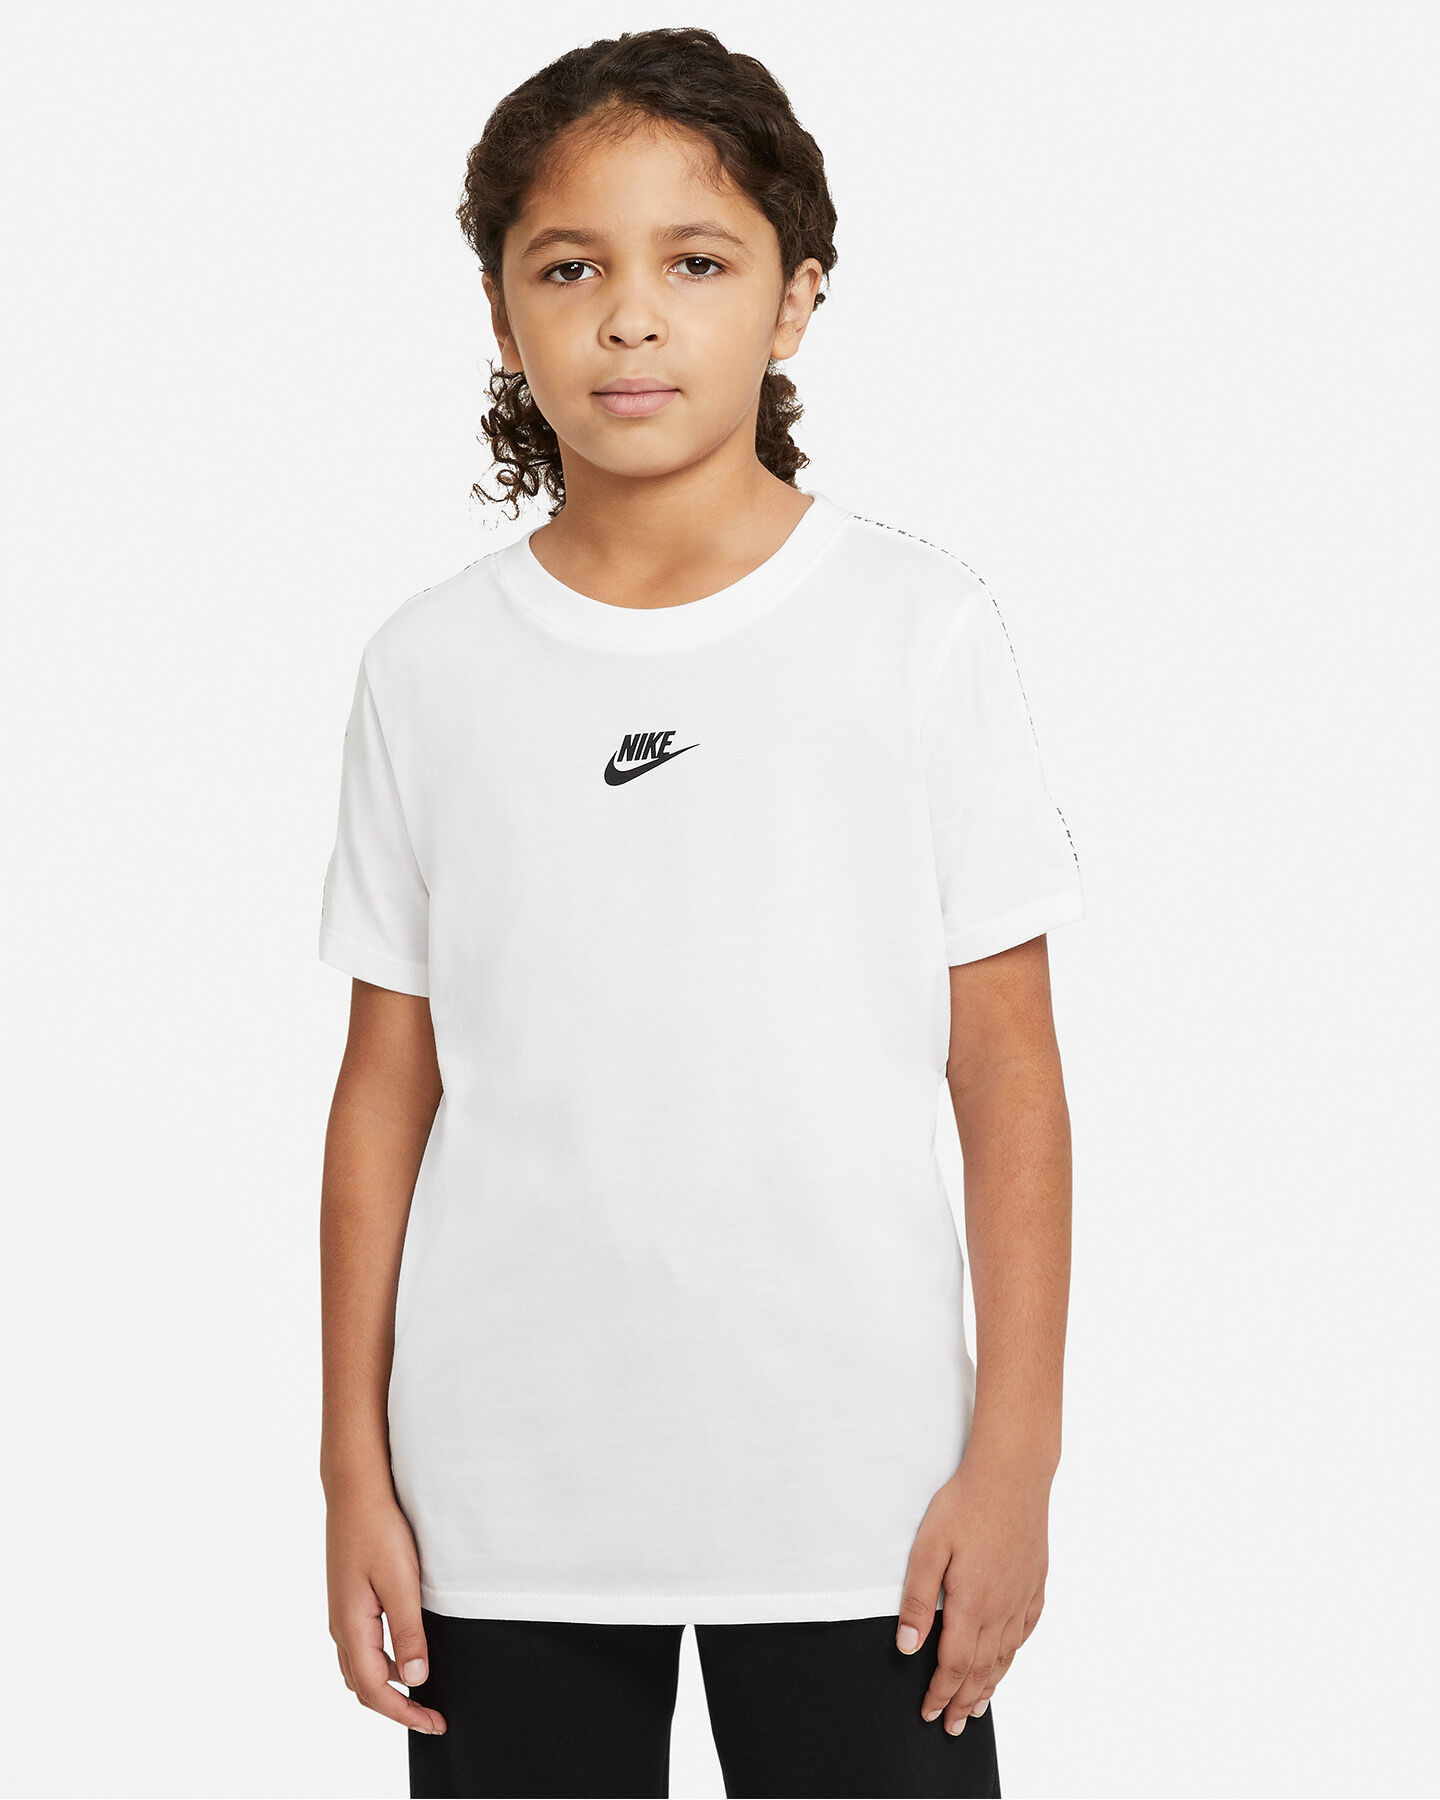  T-Shirt NIKE REPEAT LOGO JR S5299799|100|S scatto 0